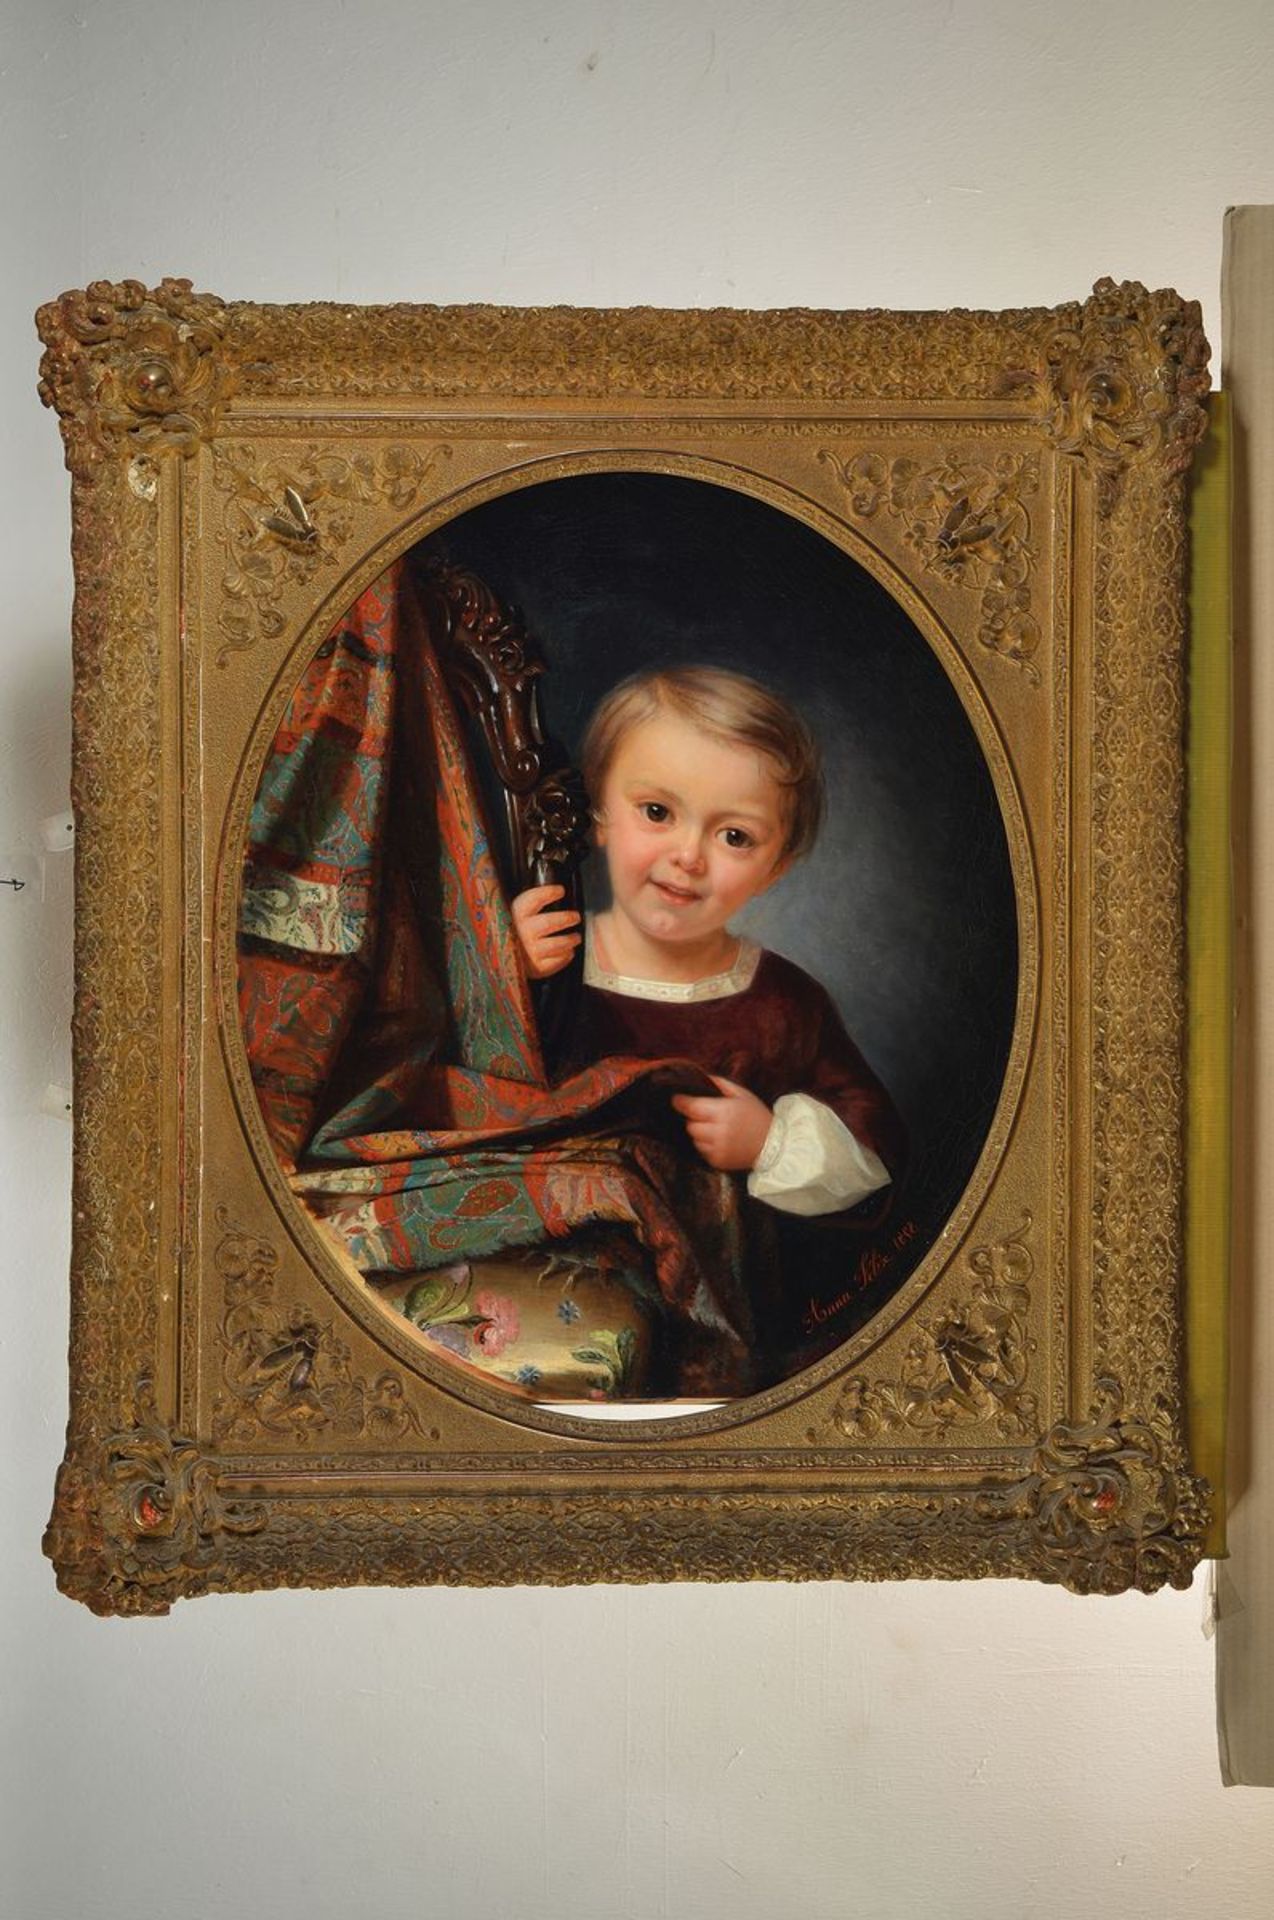 Anna Felix, 1827 - 1863, portrait of a child, little girl looks at the viewer with a smile, next - Image 2 of 2